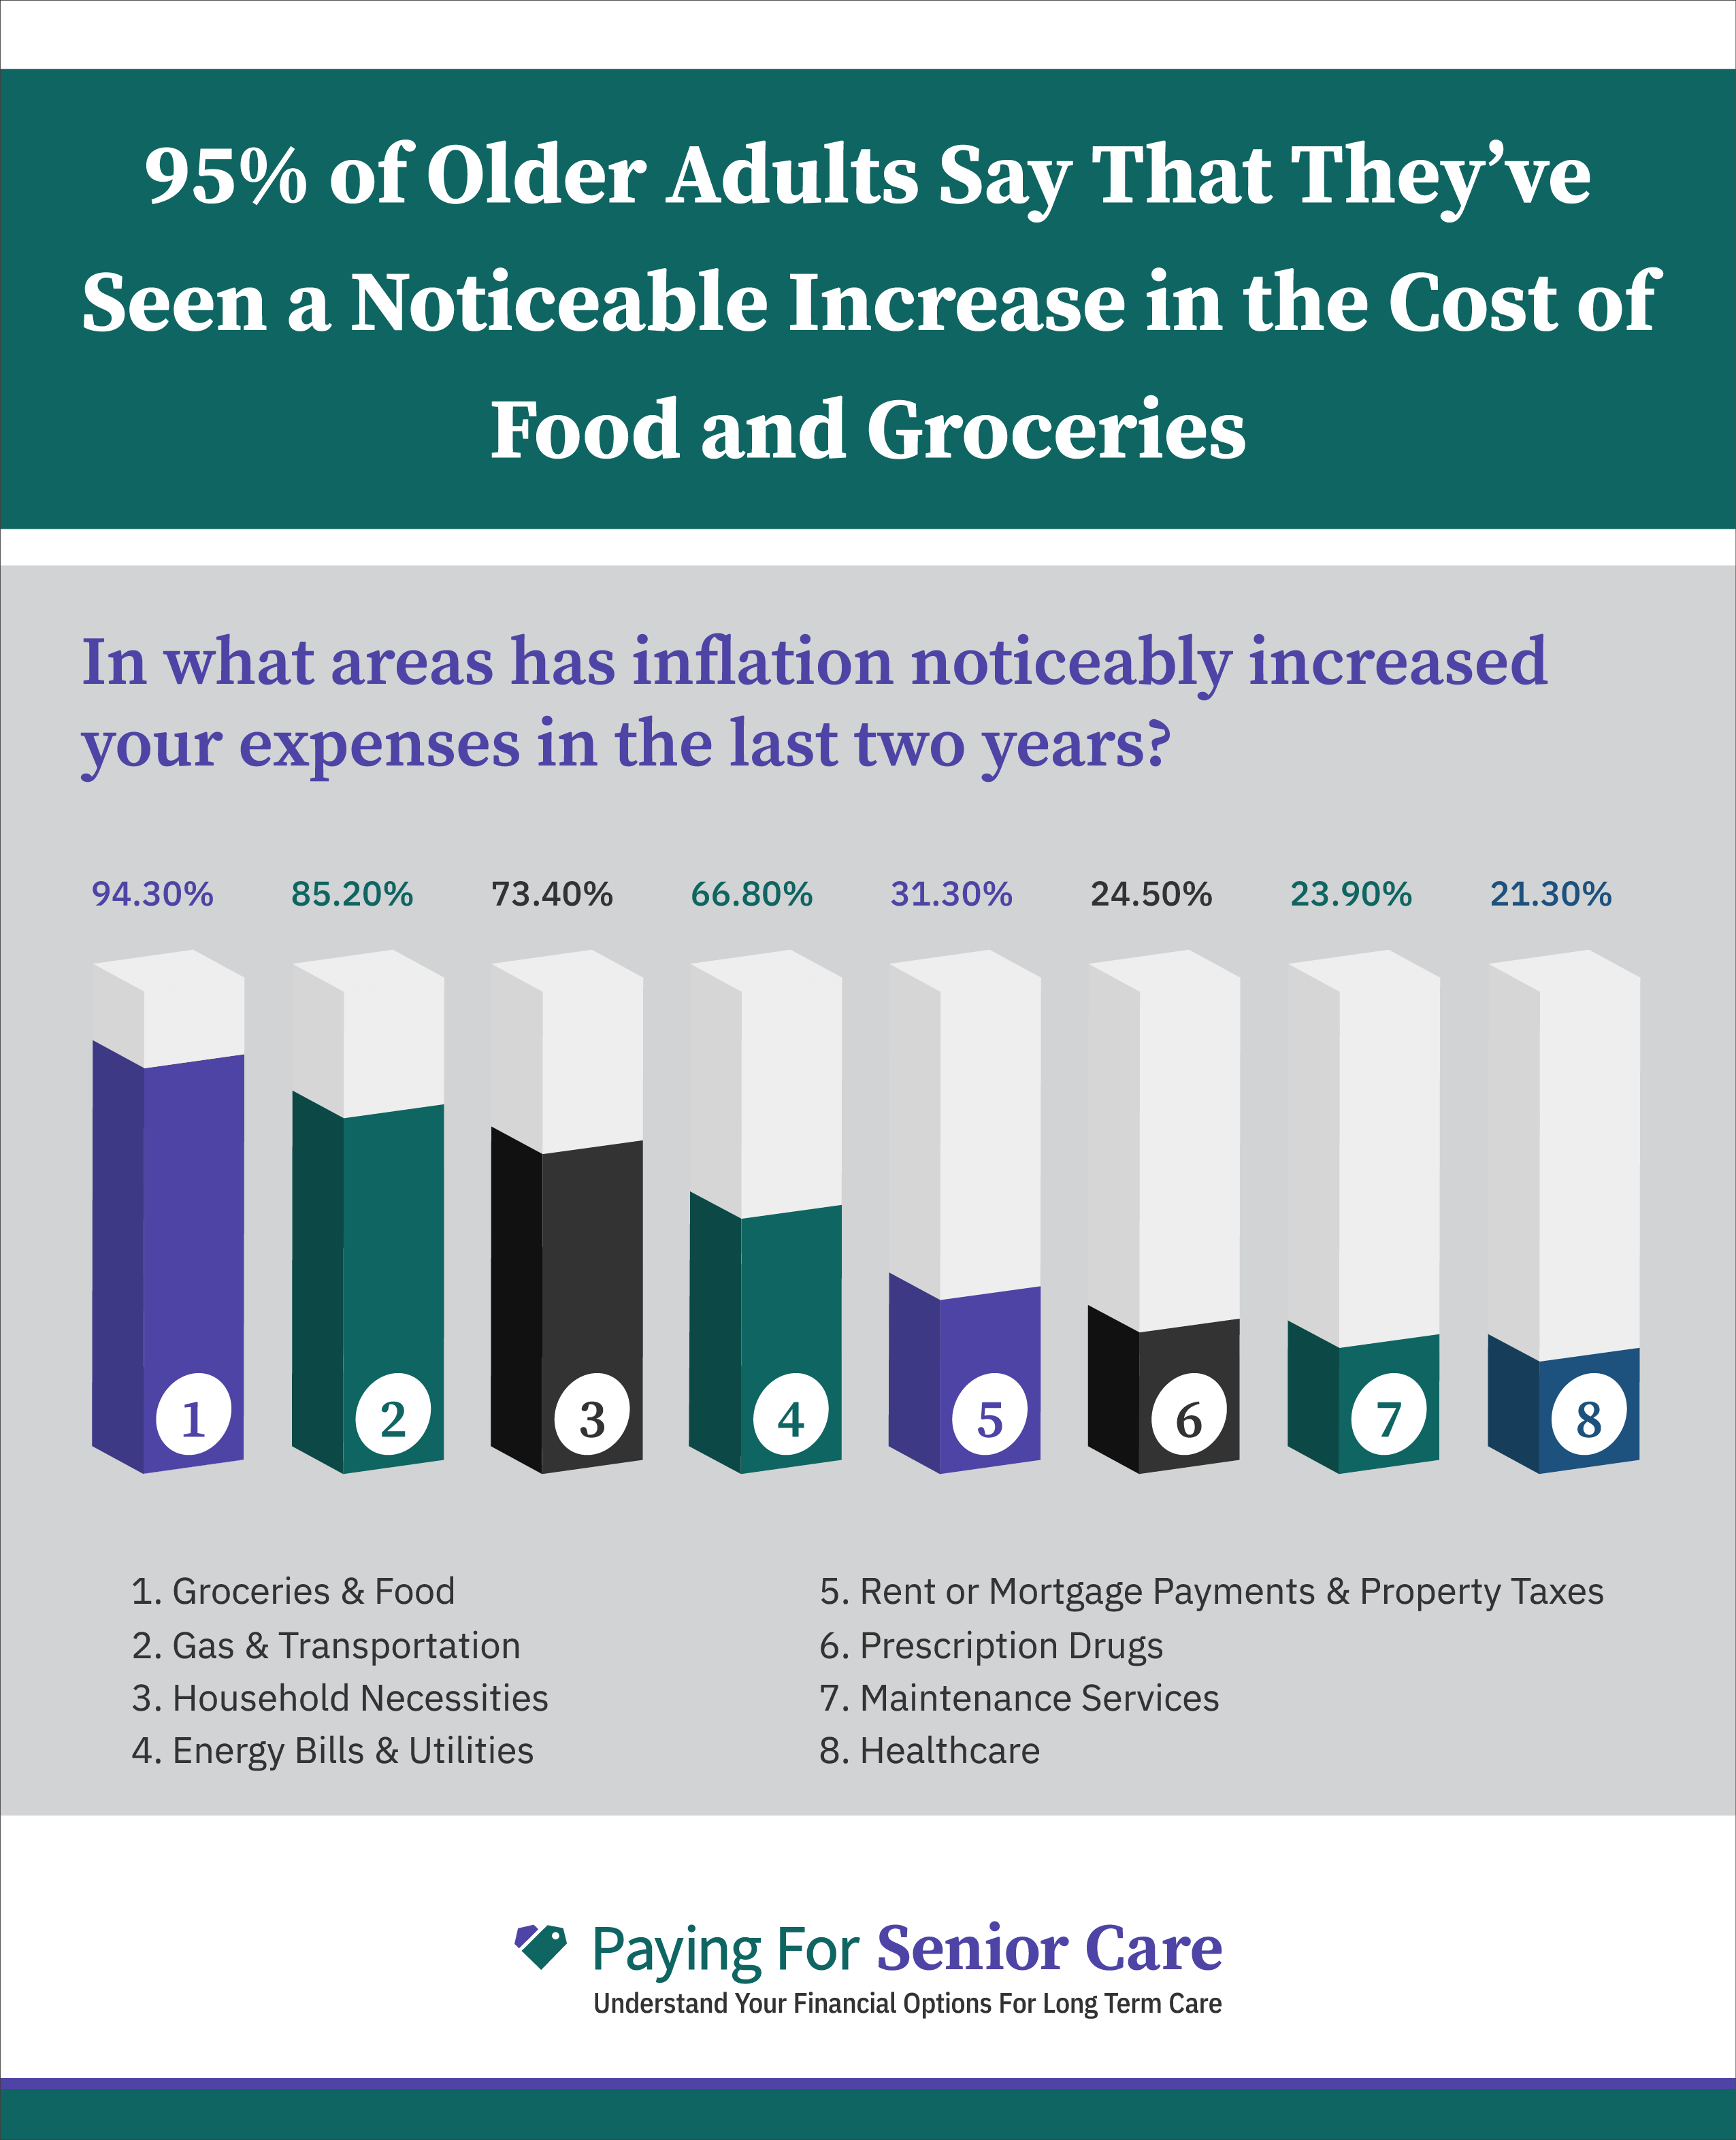 Image of a graph showing what spending categories seniors have seen inflation increase their spending in